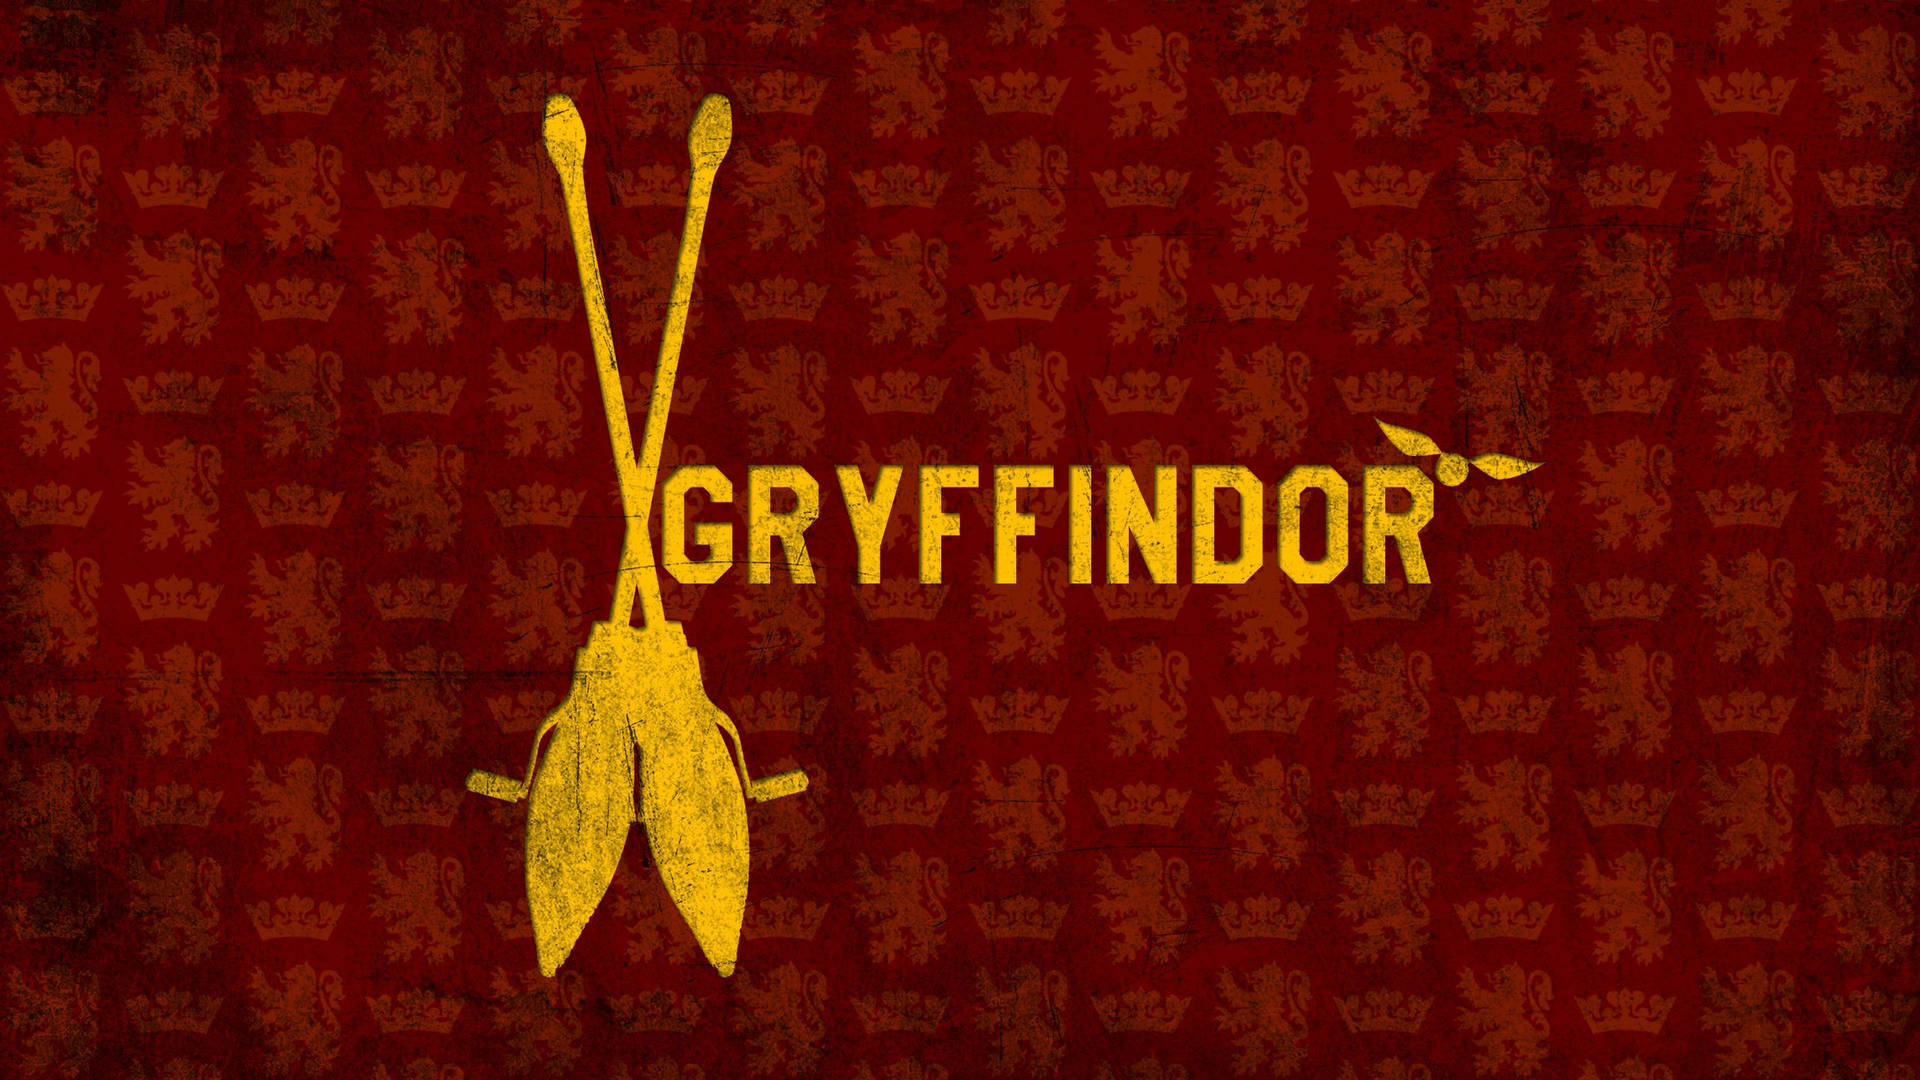 Harry Potter champions of Quidditch, the Gryffindor team Wallpaper